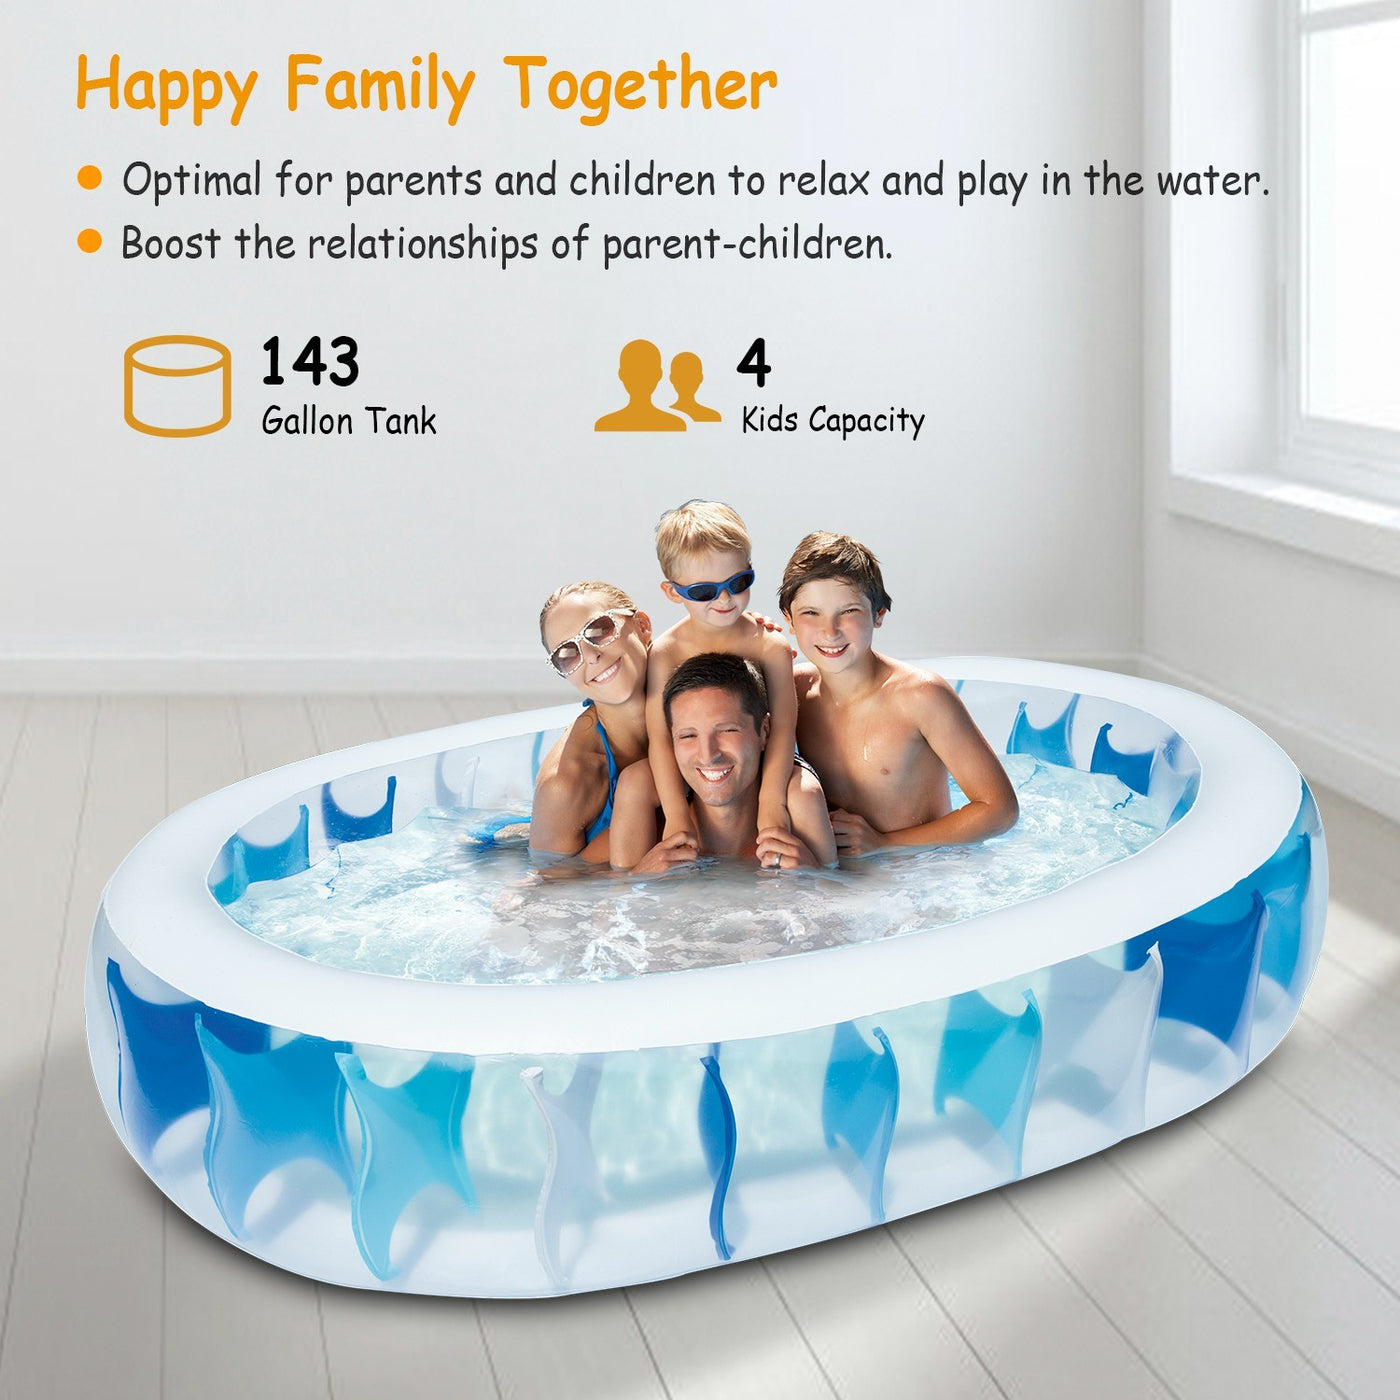 90" L ×60" W ×20"D Inflatable Swimming Pool 